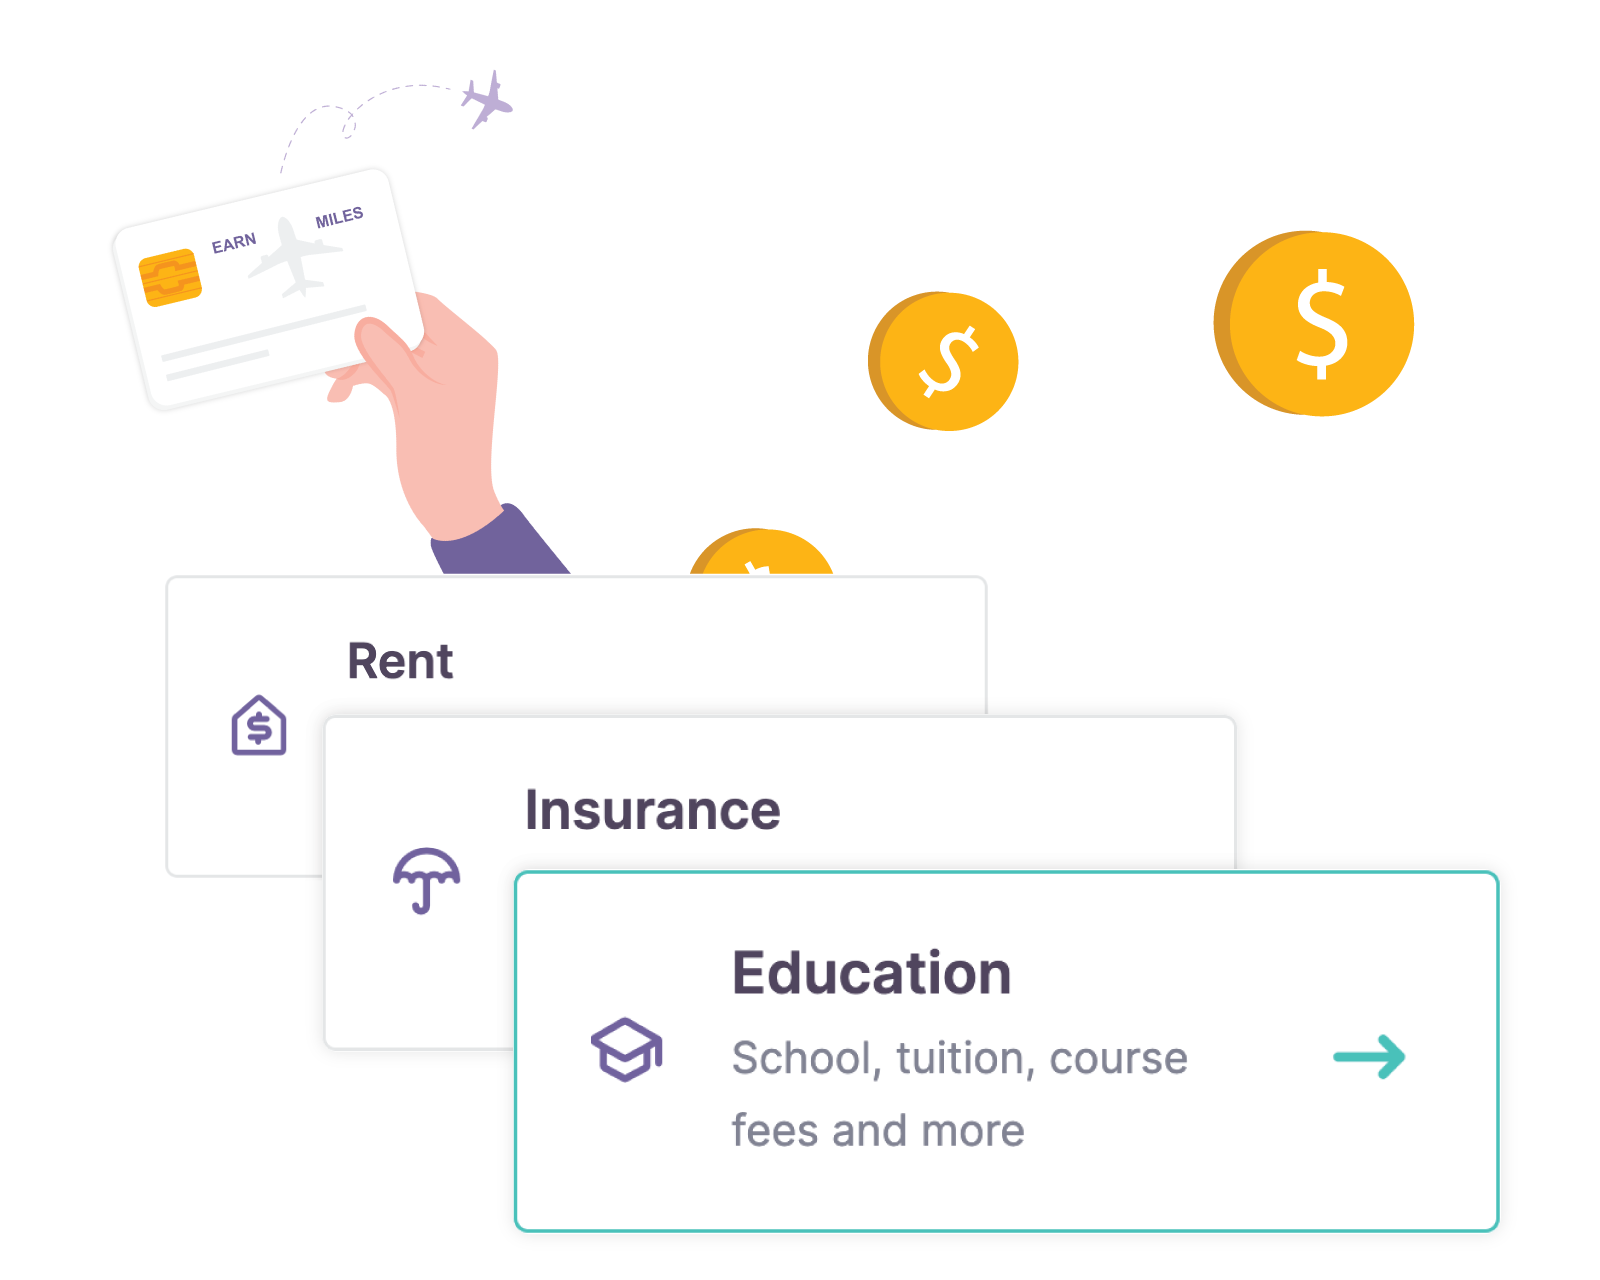 Pay international education fees, insurance, commercial rent and more by credit card and earn rewards